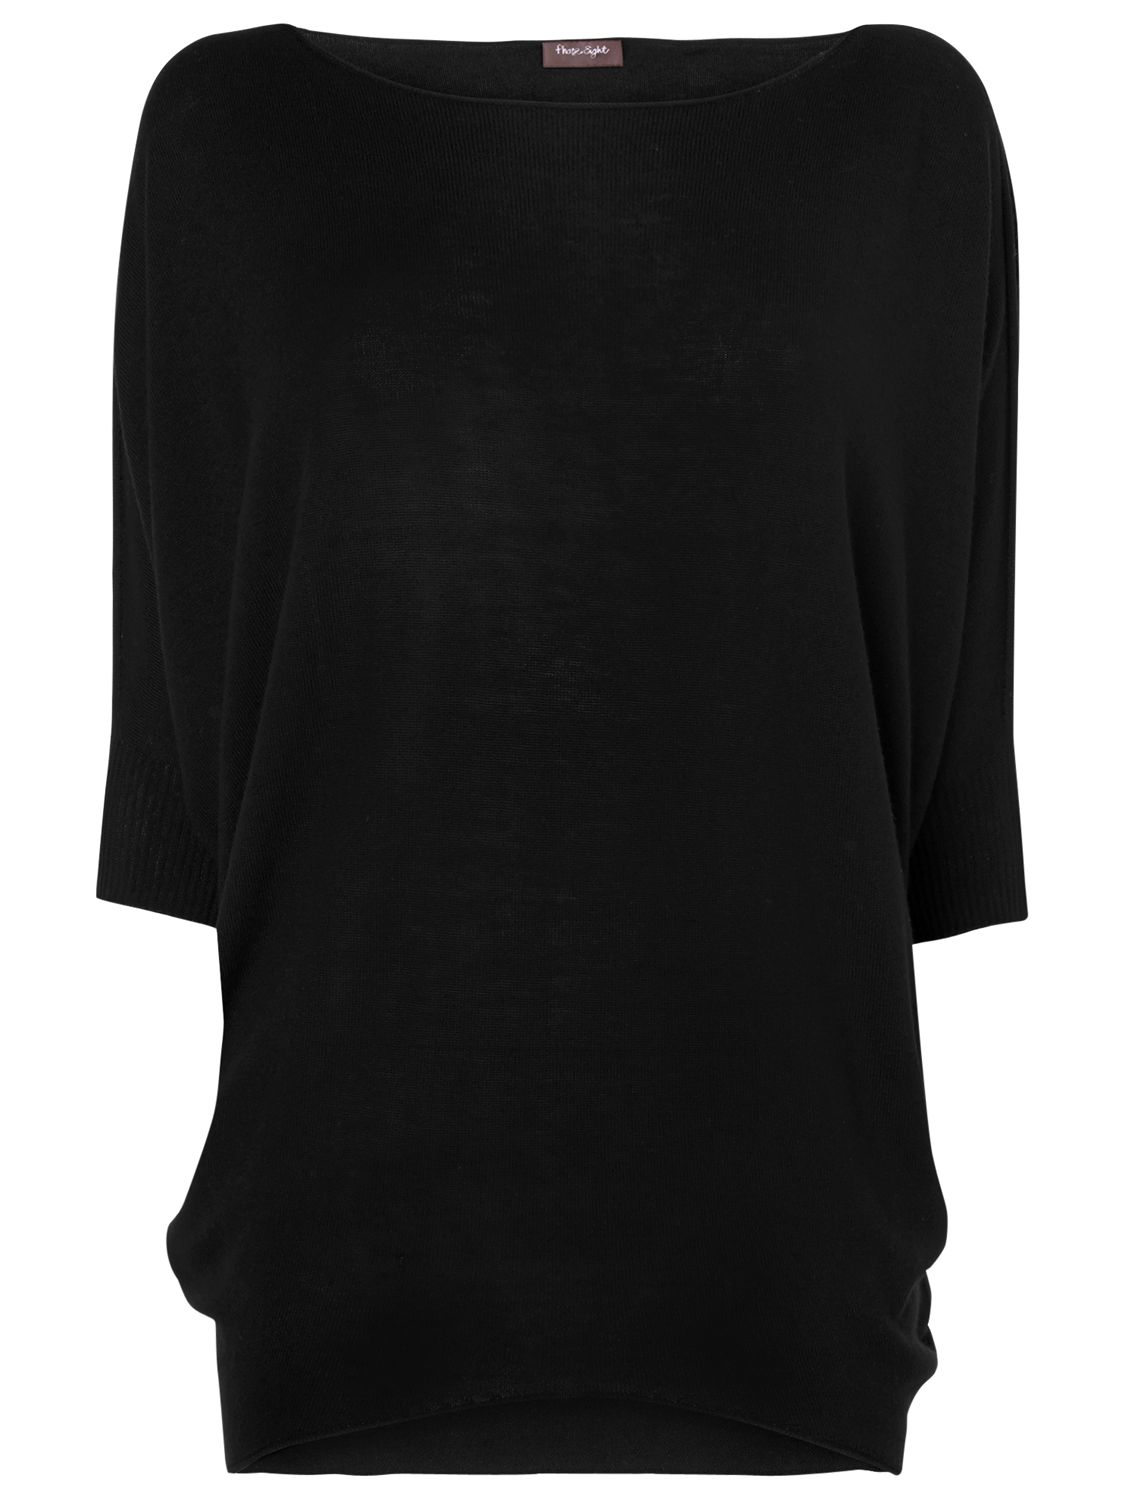 Phase Eight Becca Batwing Jumper